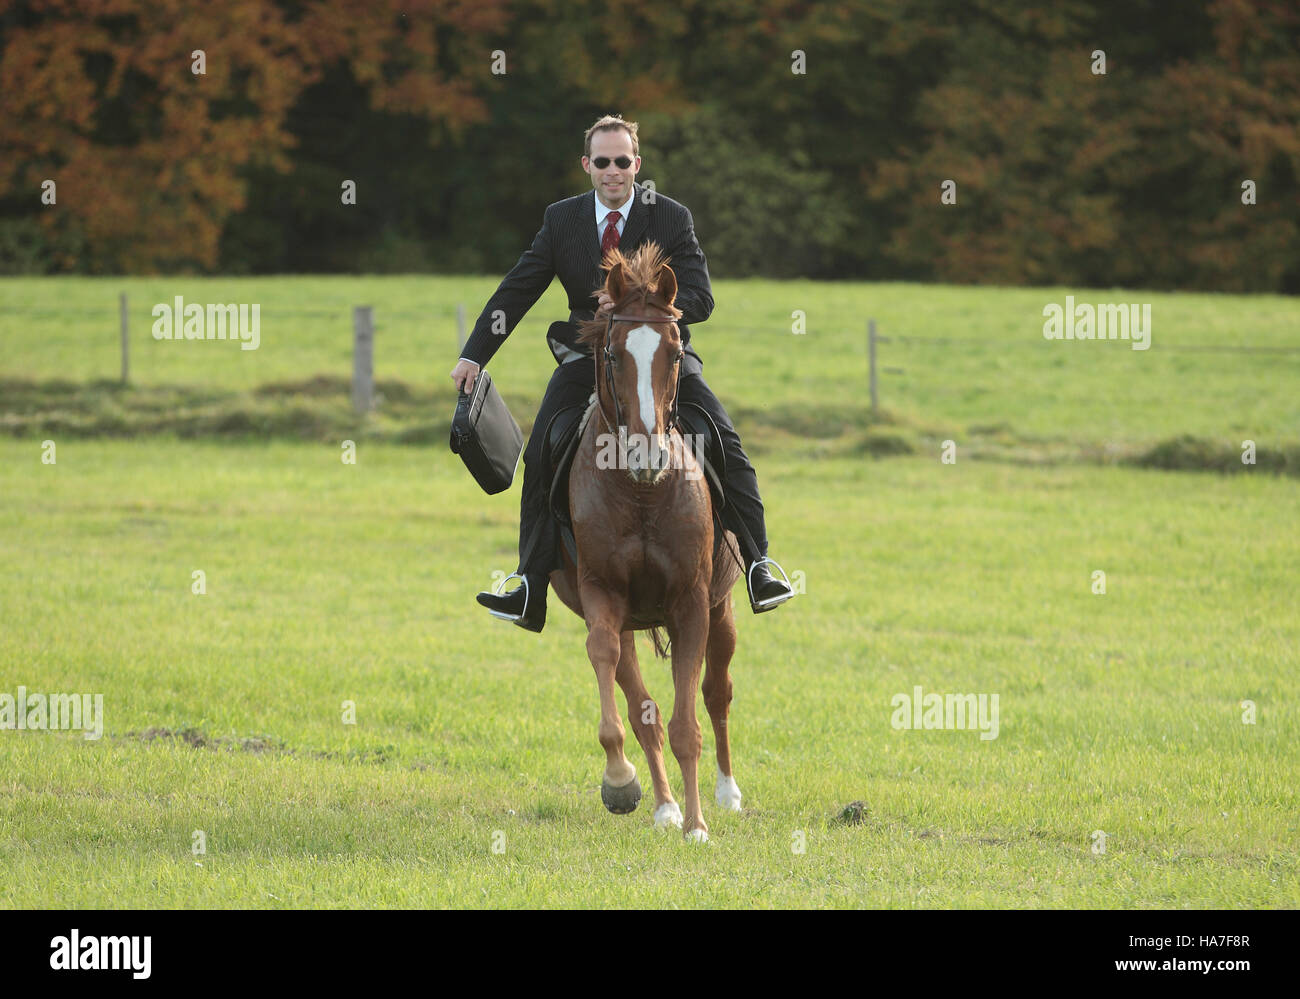 Businessman, manager with a bag, riding a horse Stock Photo